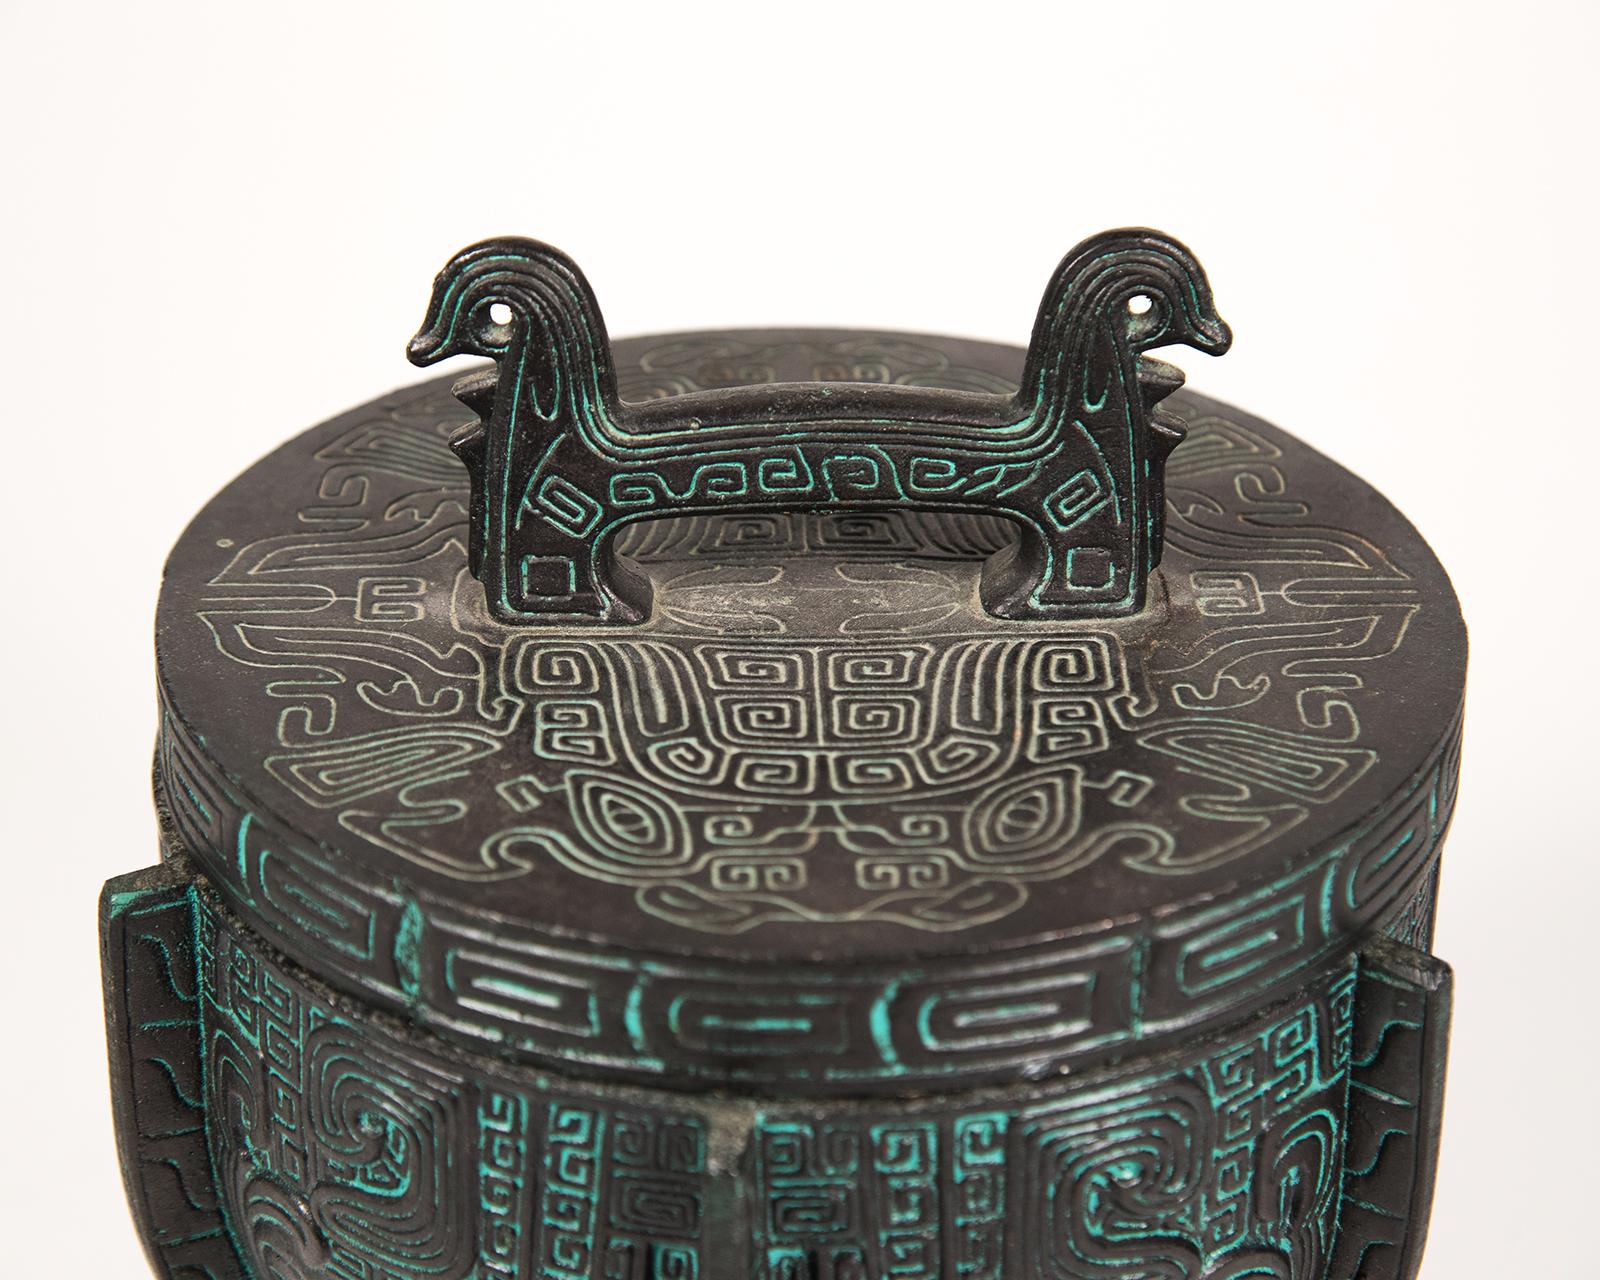 Ice bucket in the style of James Mont. The faux cast lid and body in an antiqued bronze finish in an Aztec motif. The liner is stainless steel.